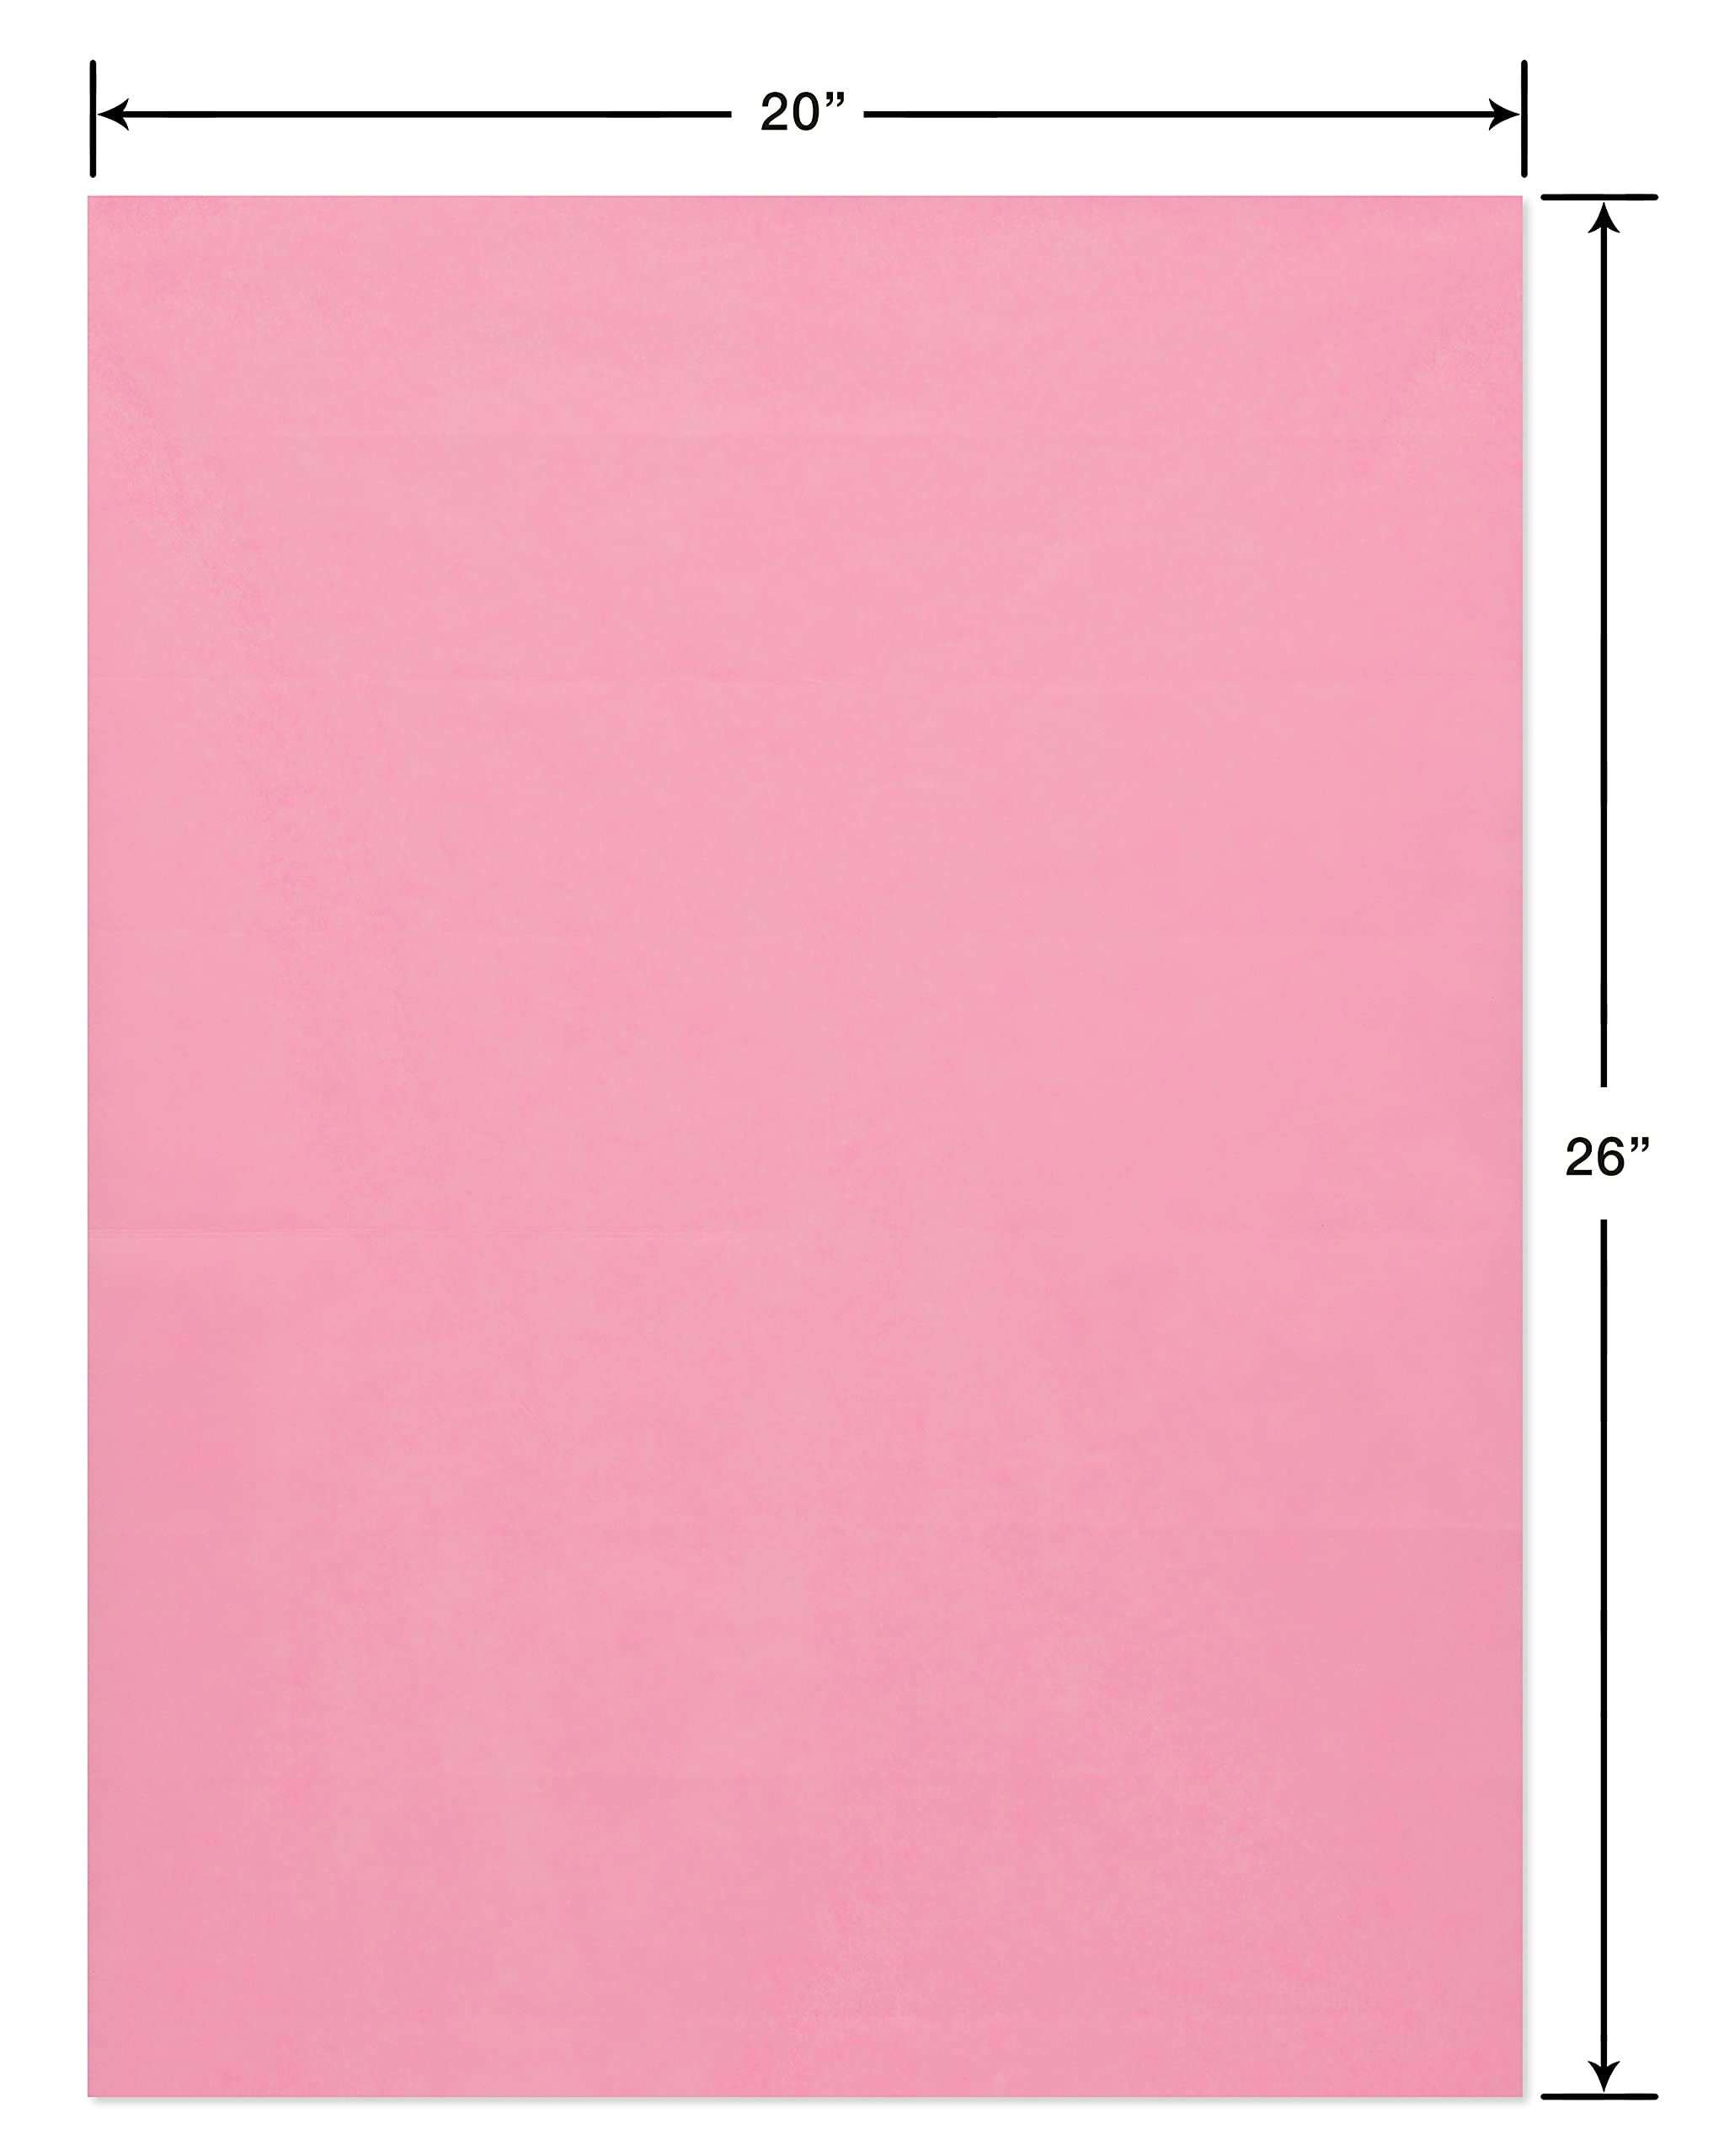 Papyrus 8 Sheet Light Pink Tissue Paper for Gifts, Decorations, Crafts, DIY and More